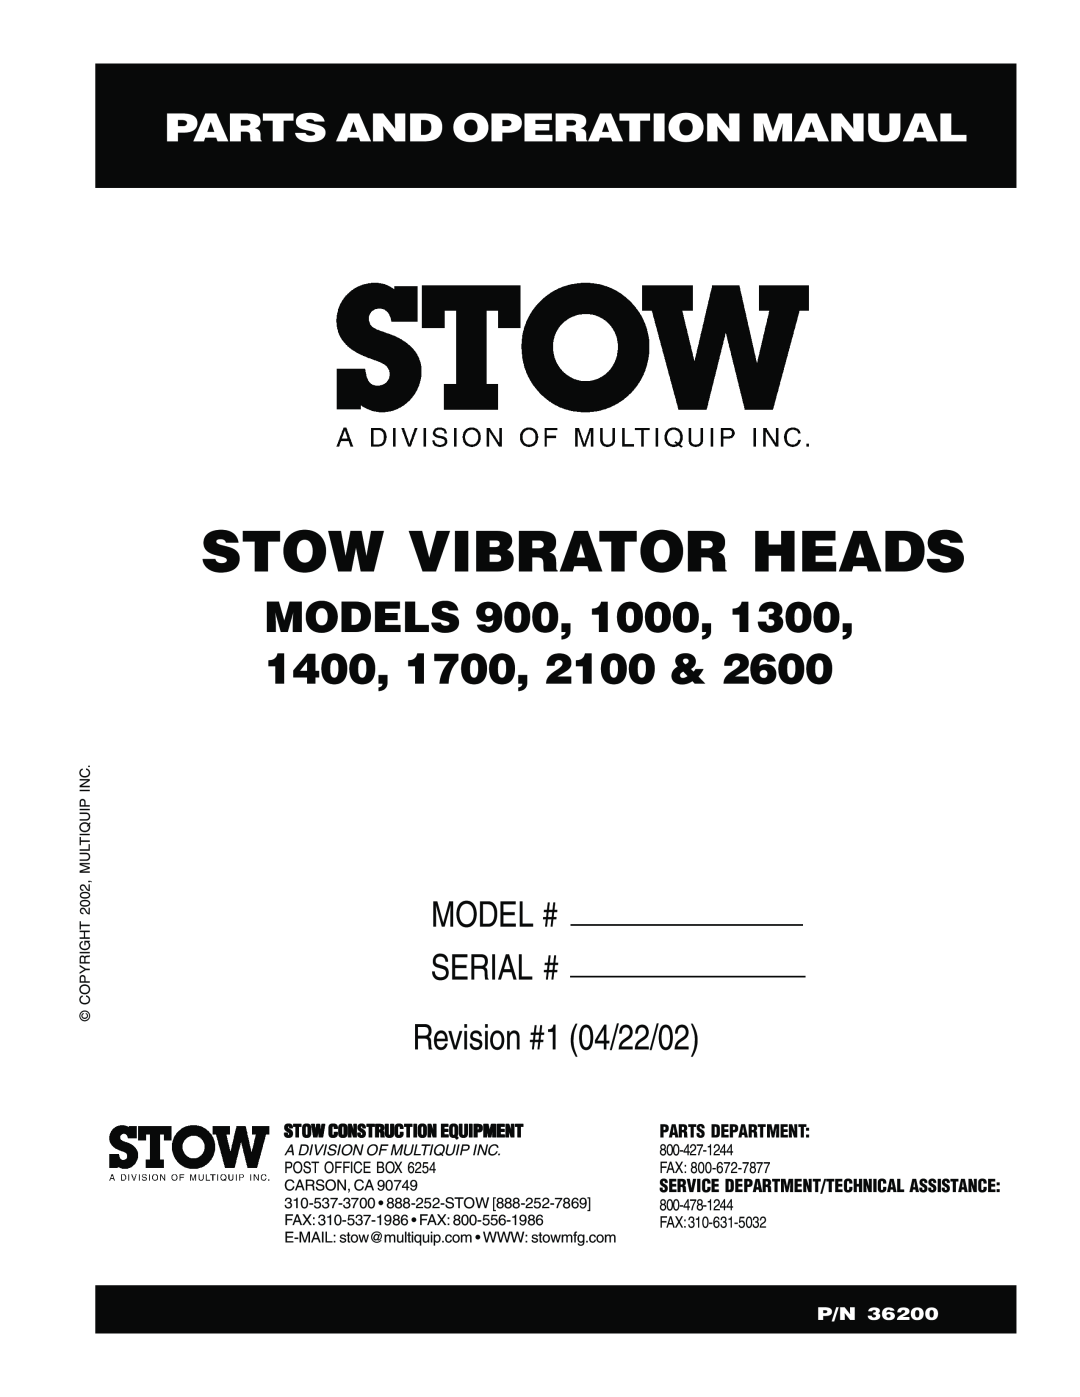 Stow 2600 operation manual Stow Vibrator Heads, Parts And Operation Manual, MODELS 900, 1000, 1300, 1400, 1700, 2100 